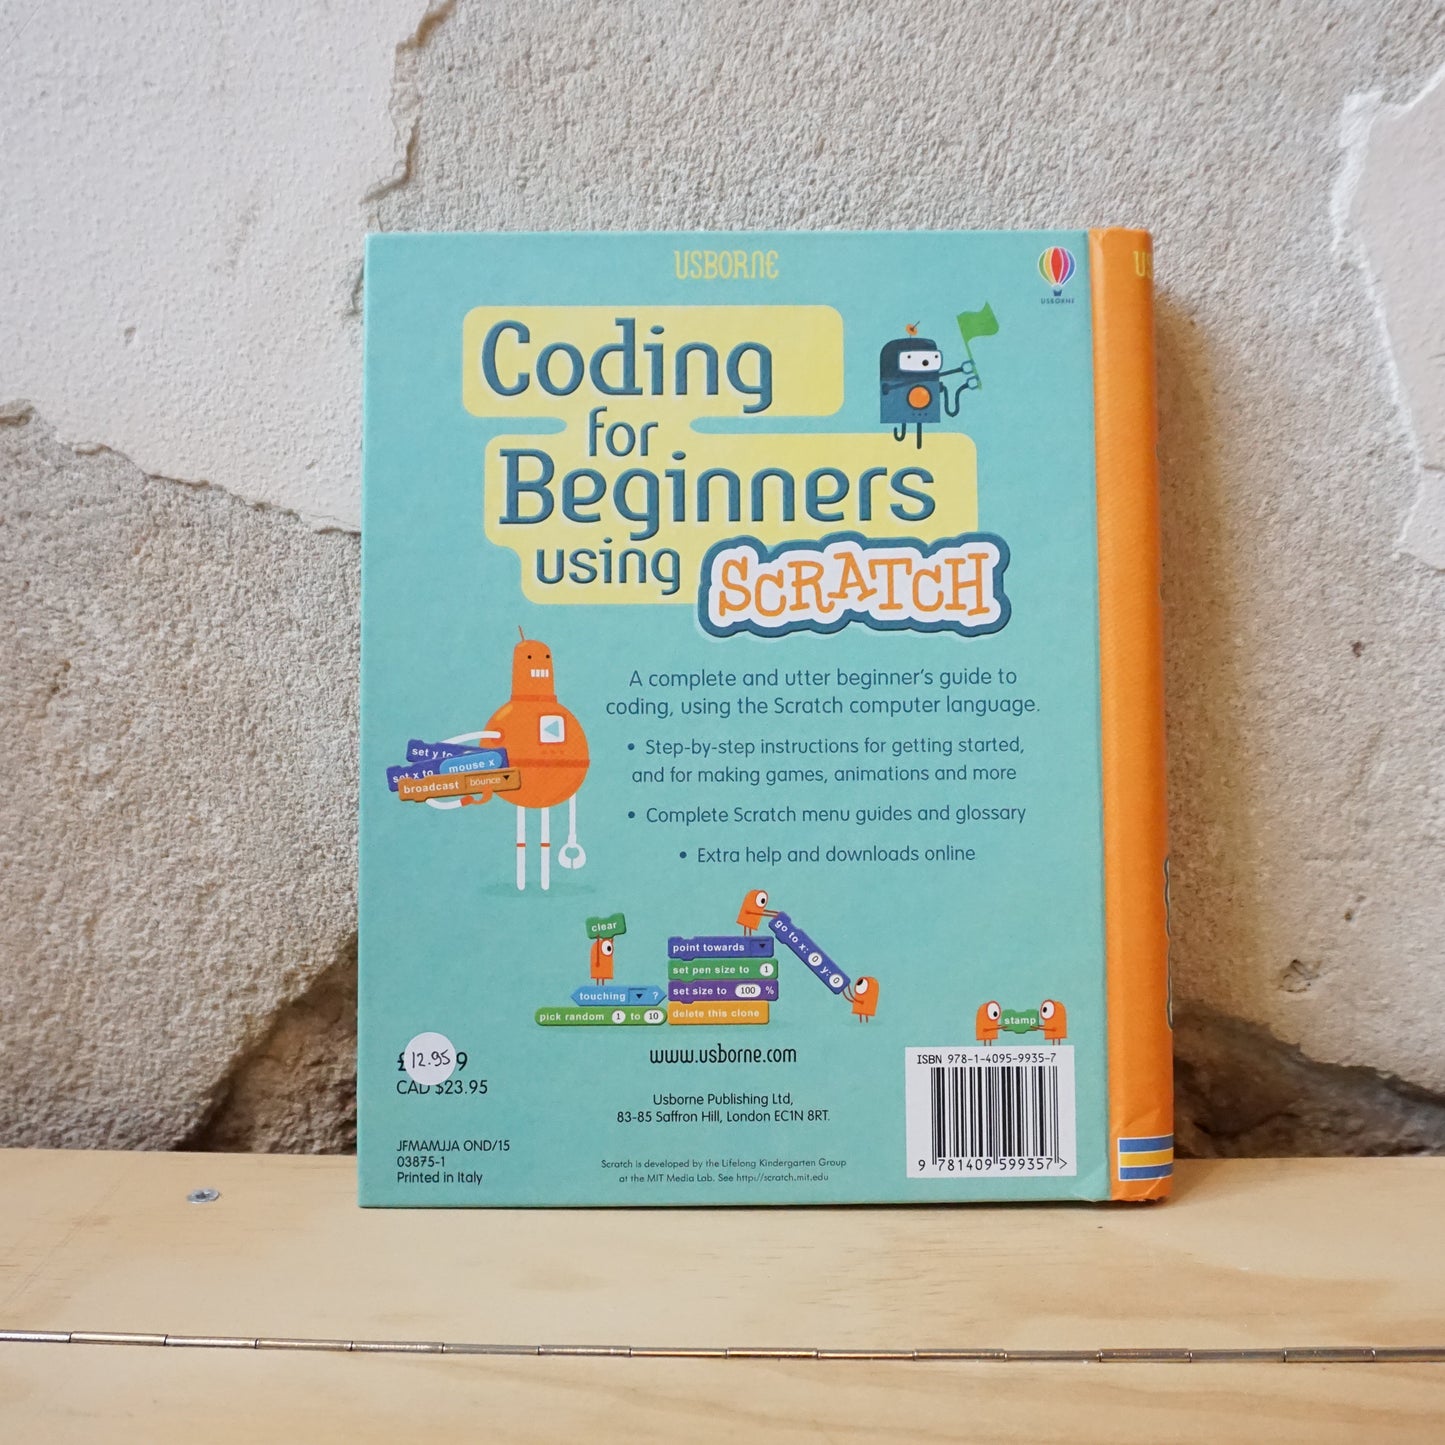 Coding for Beginners Using Scratch – Rosie Dickins, Shaw Nielsen